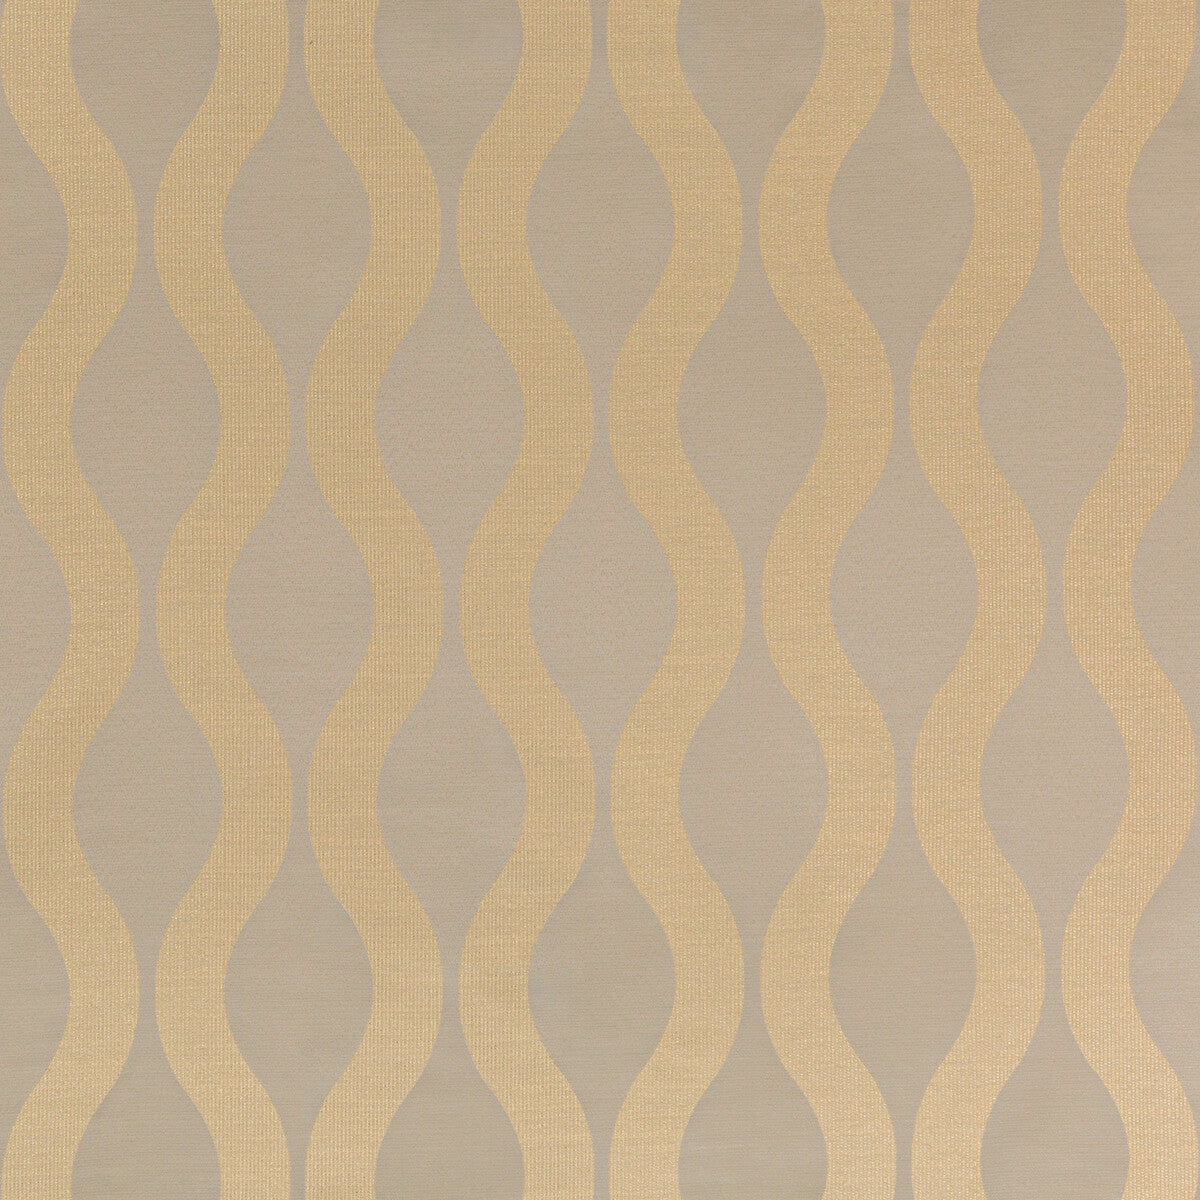 Nellie fabric in butterscotch color - pattern 4660.416.0 - by Kravet Contract